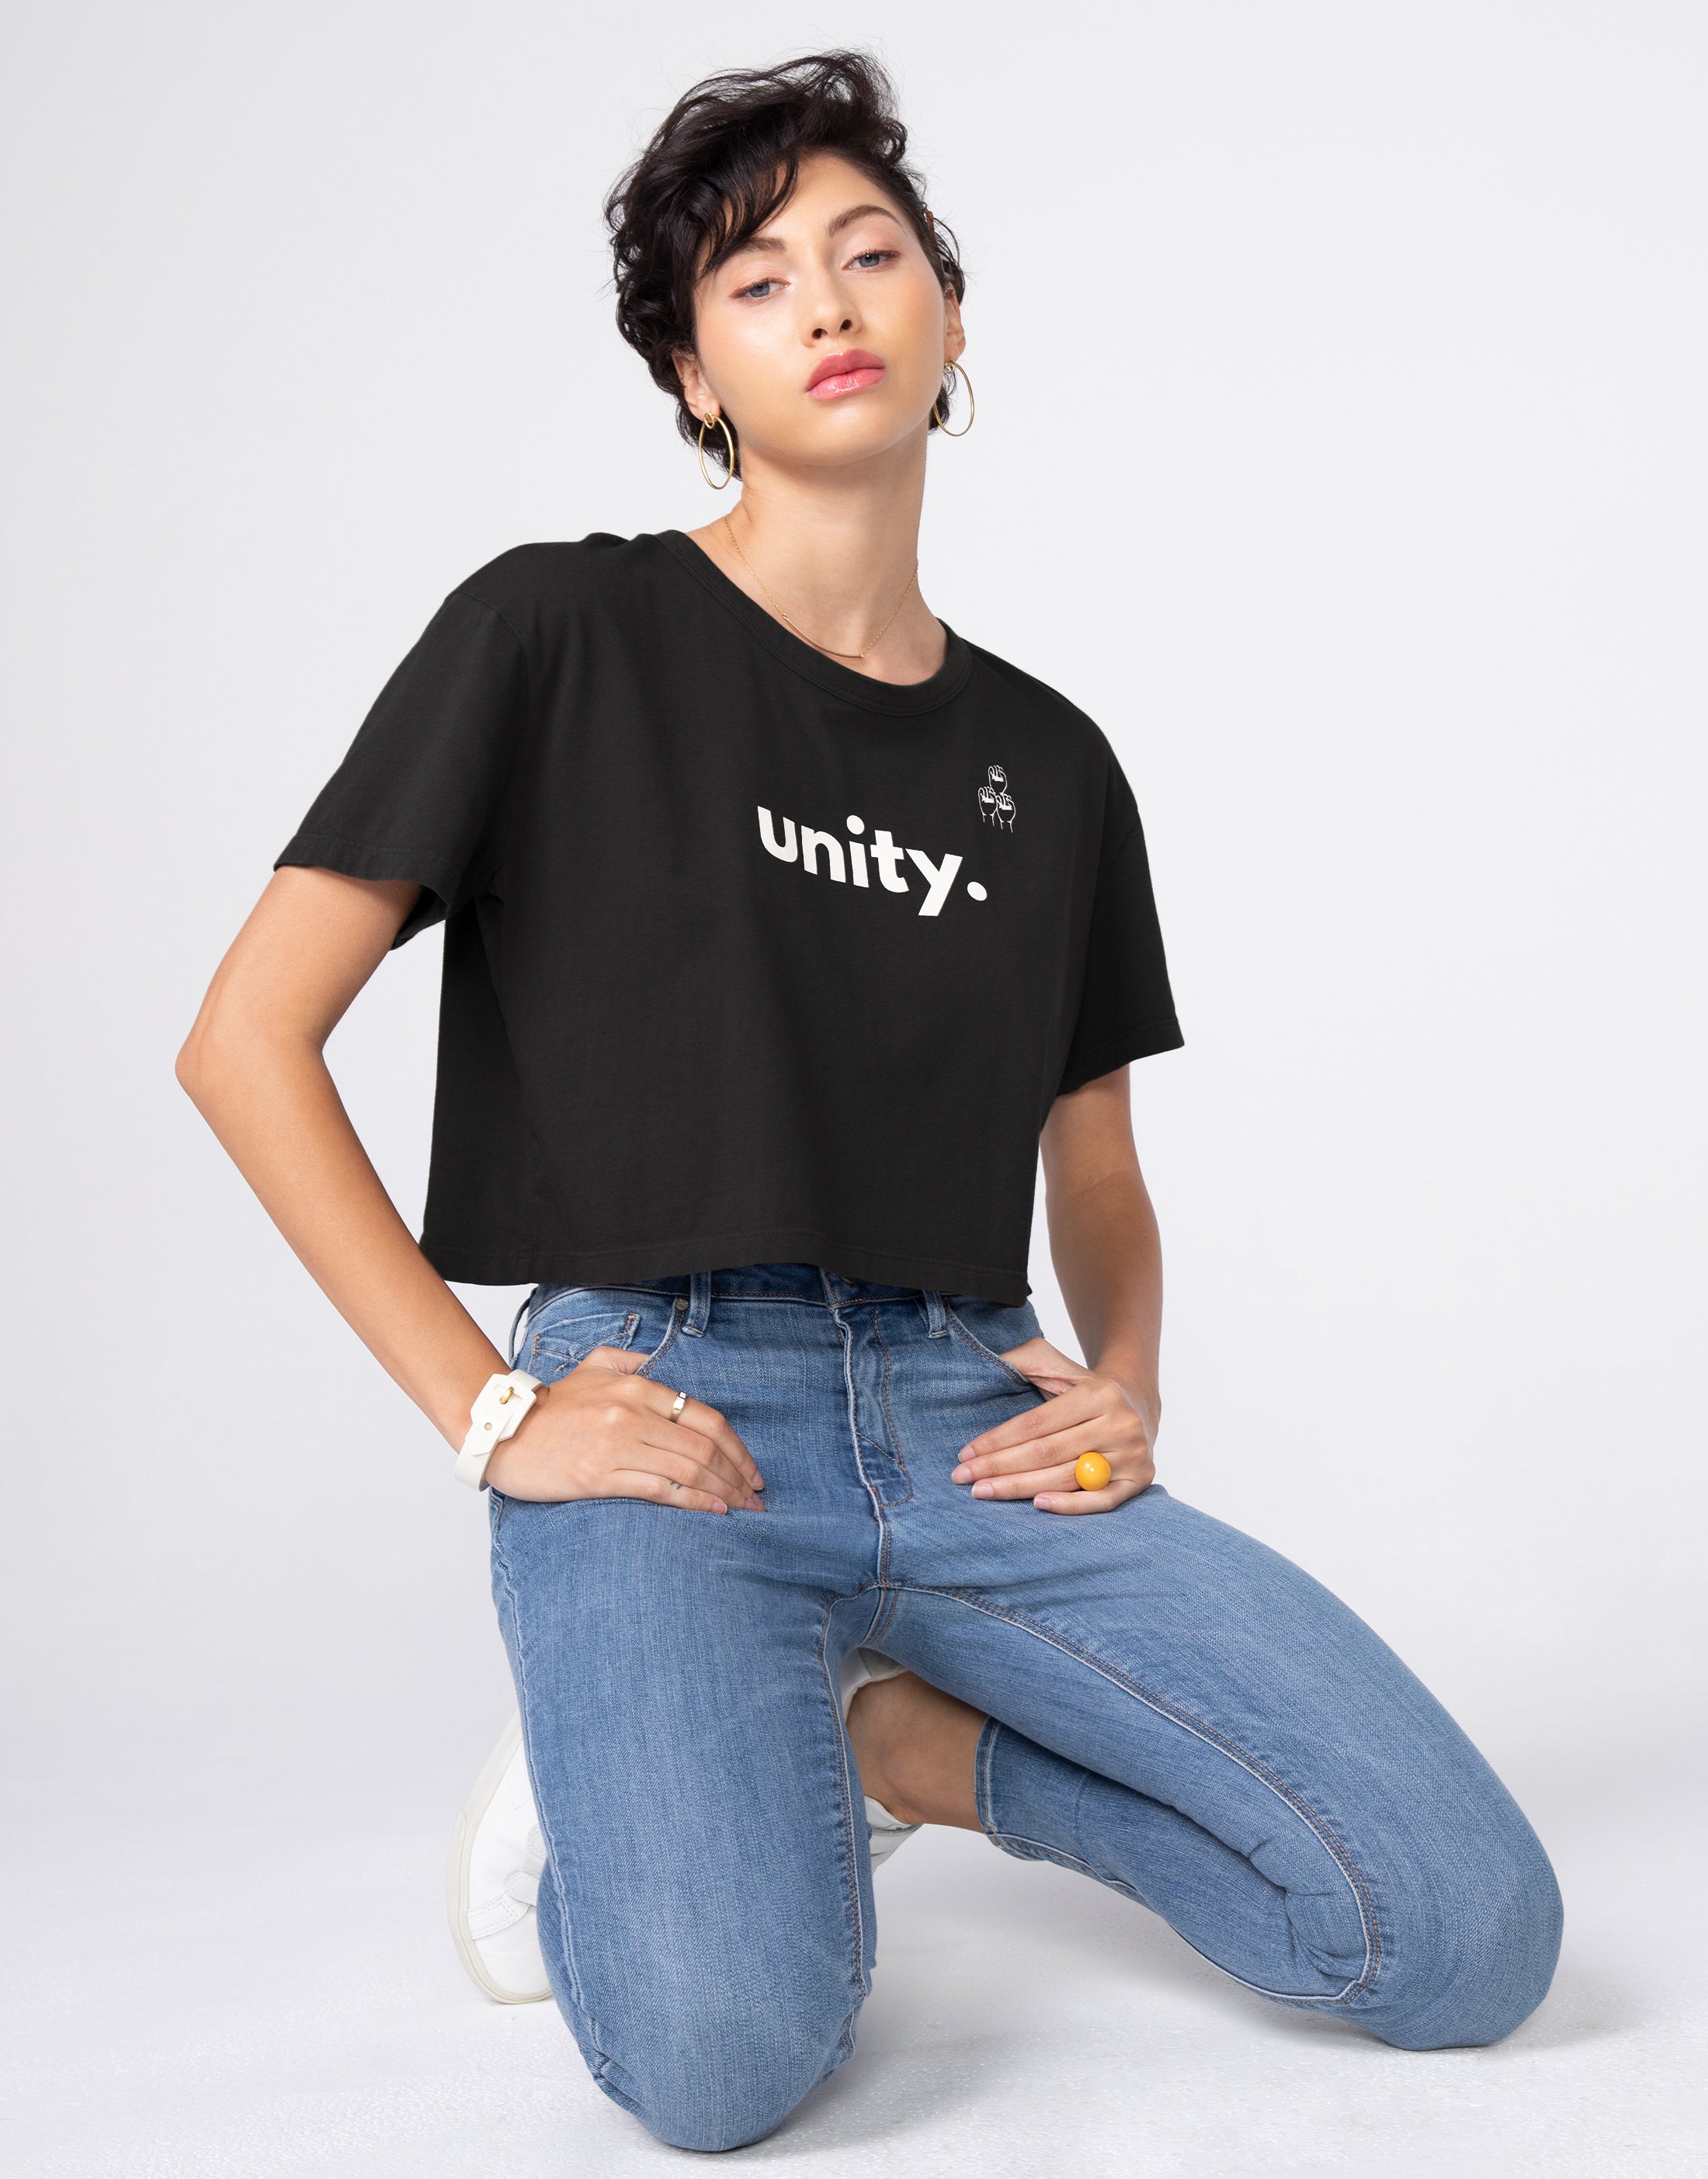 BOWIE Boxy Crop Tee in Unity